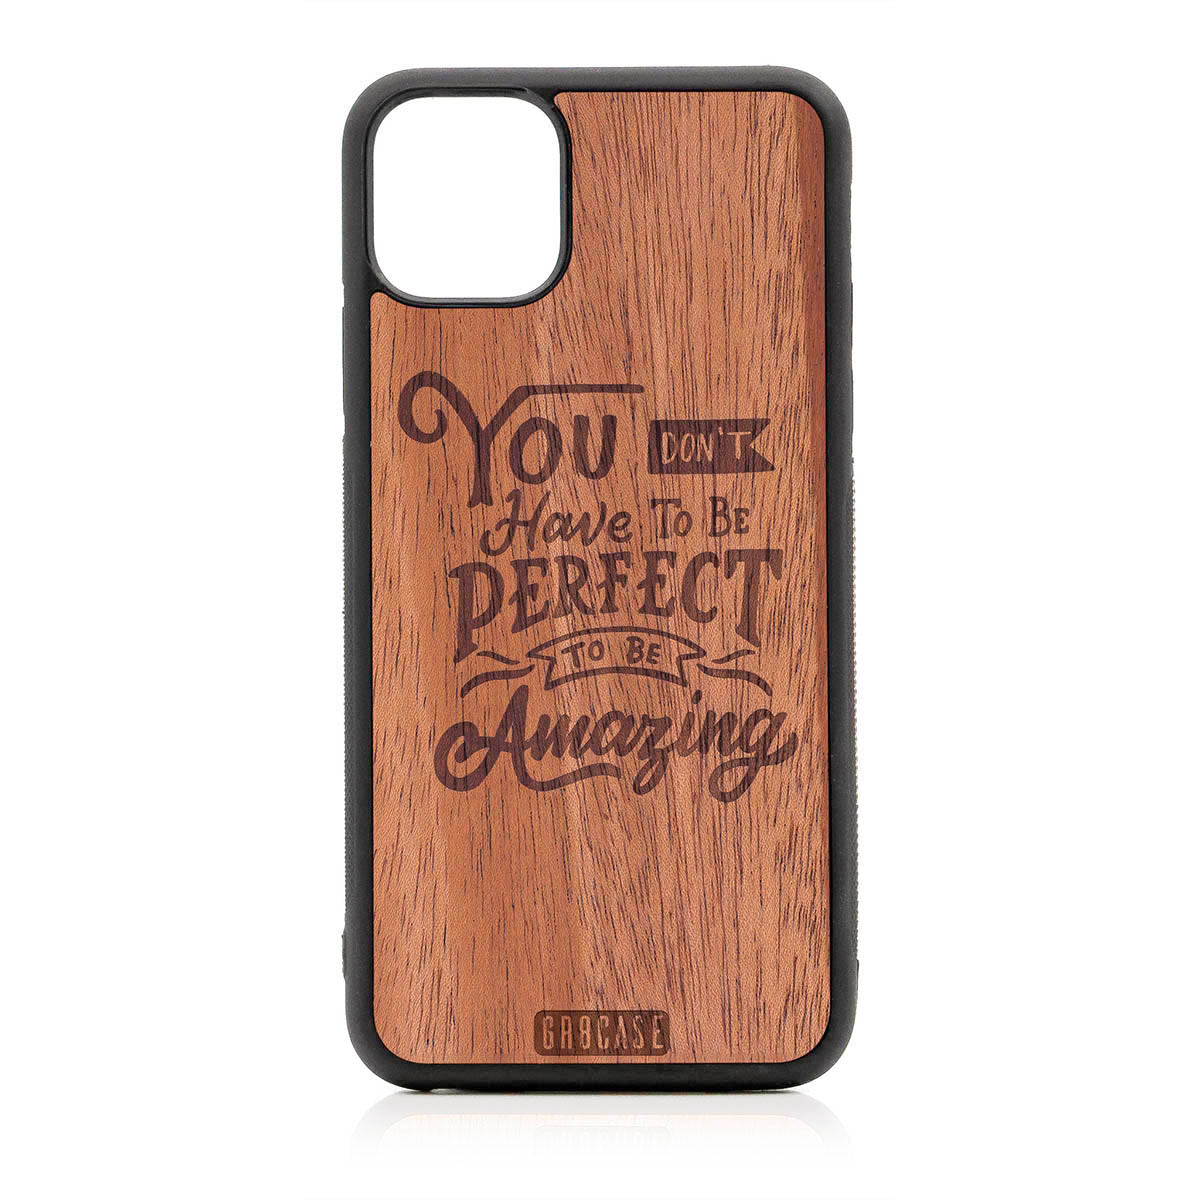 You Don't Have To Be Perfect To Be Amazing Design Wood Case For iPhone 11 Pro Max